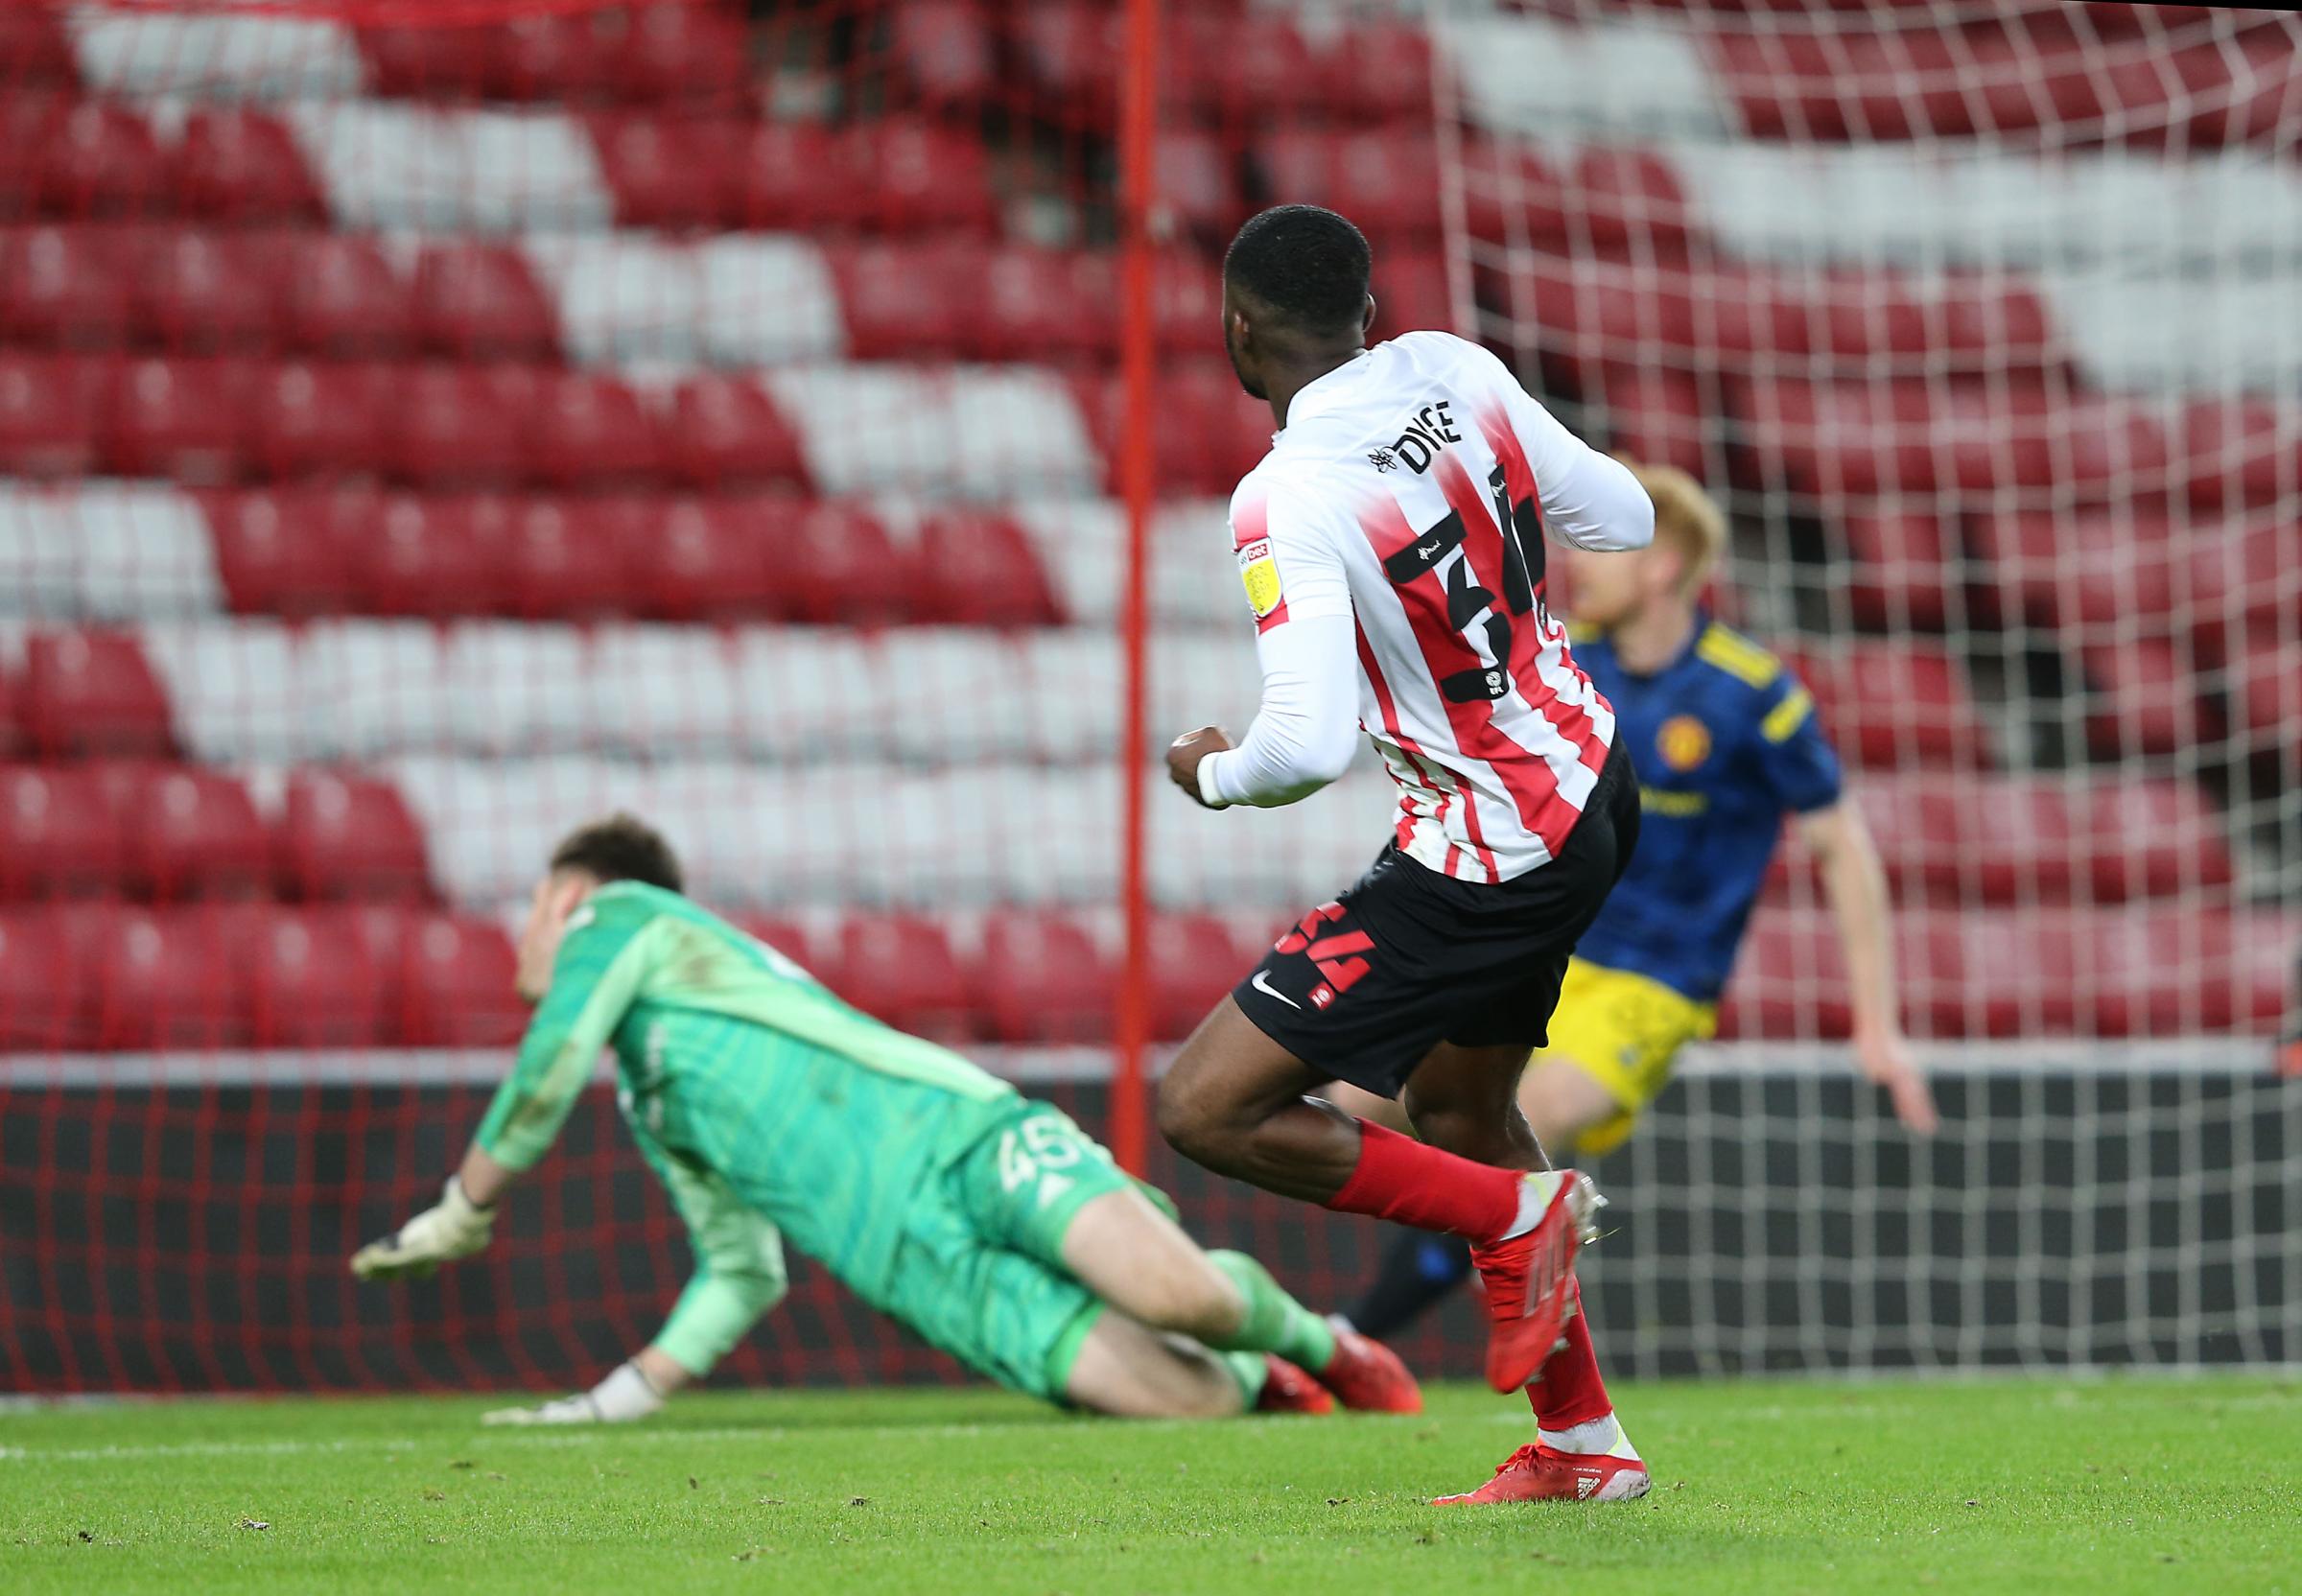 Sunderland full-back Tyrese Dyce will leave the club at the end of the season